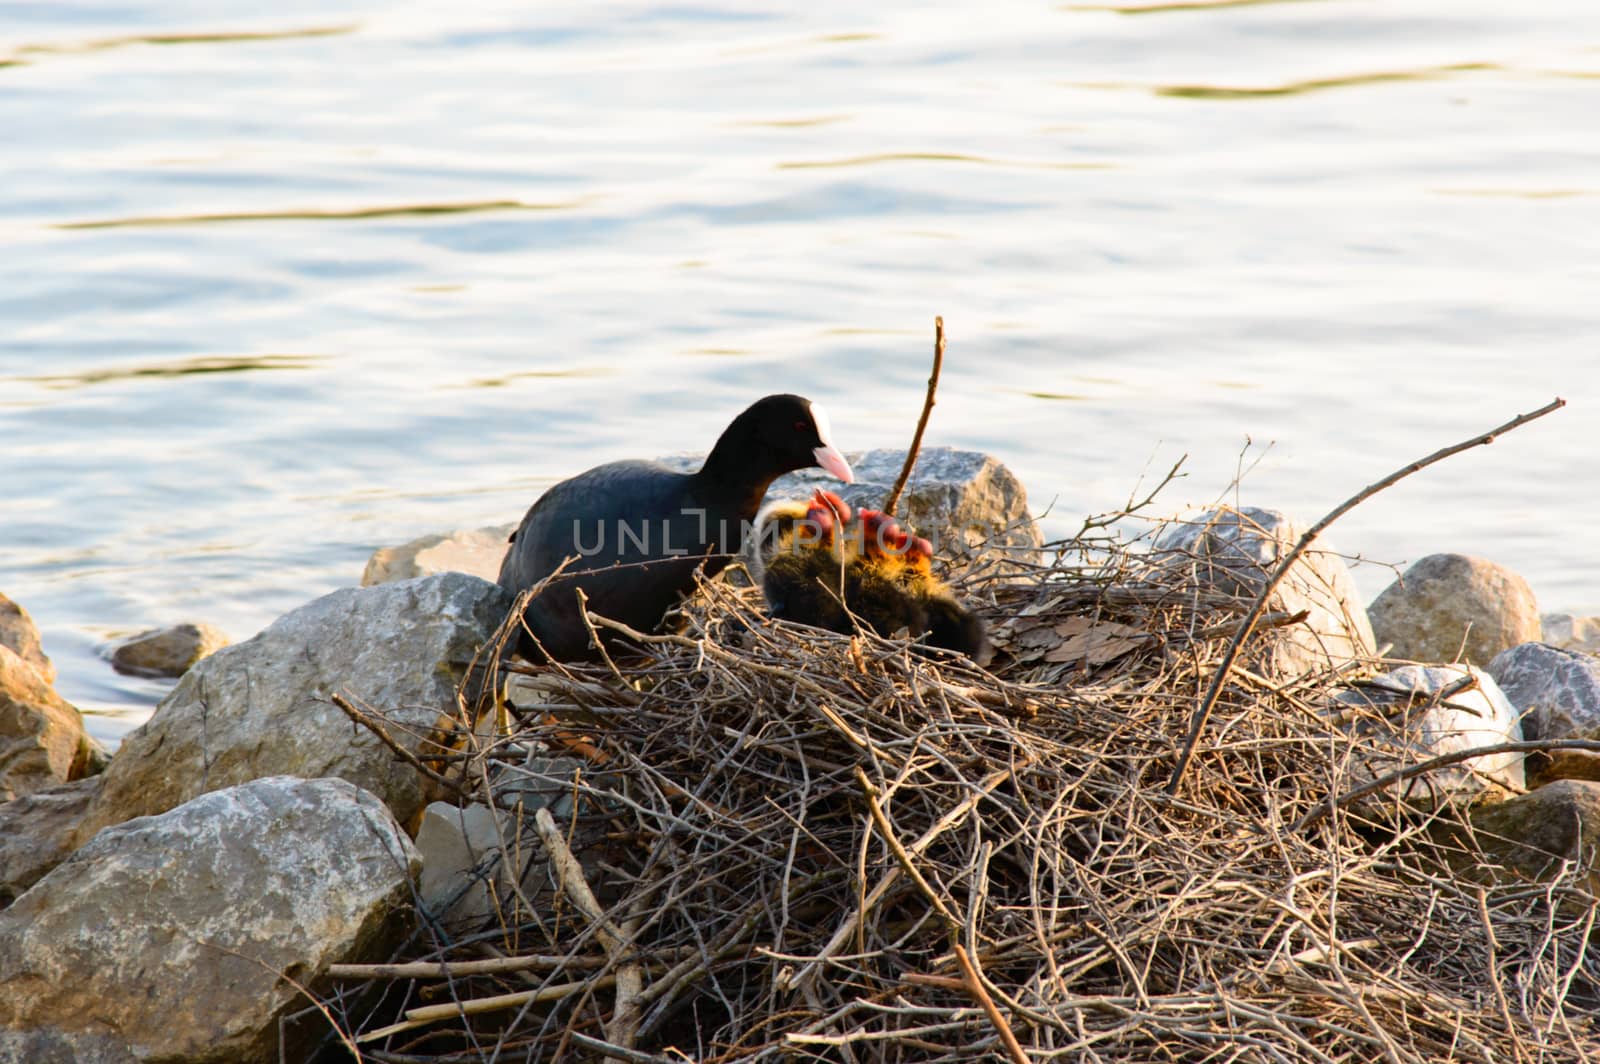 Moorhen with a family of young chicks sitting on her nest of twigs constructed on a calm lake alongside rocks